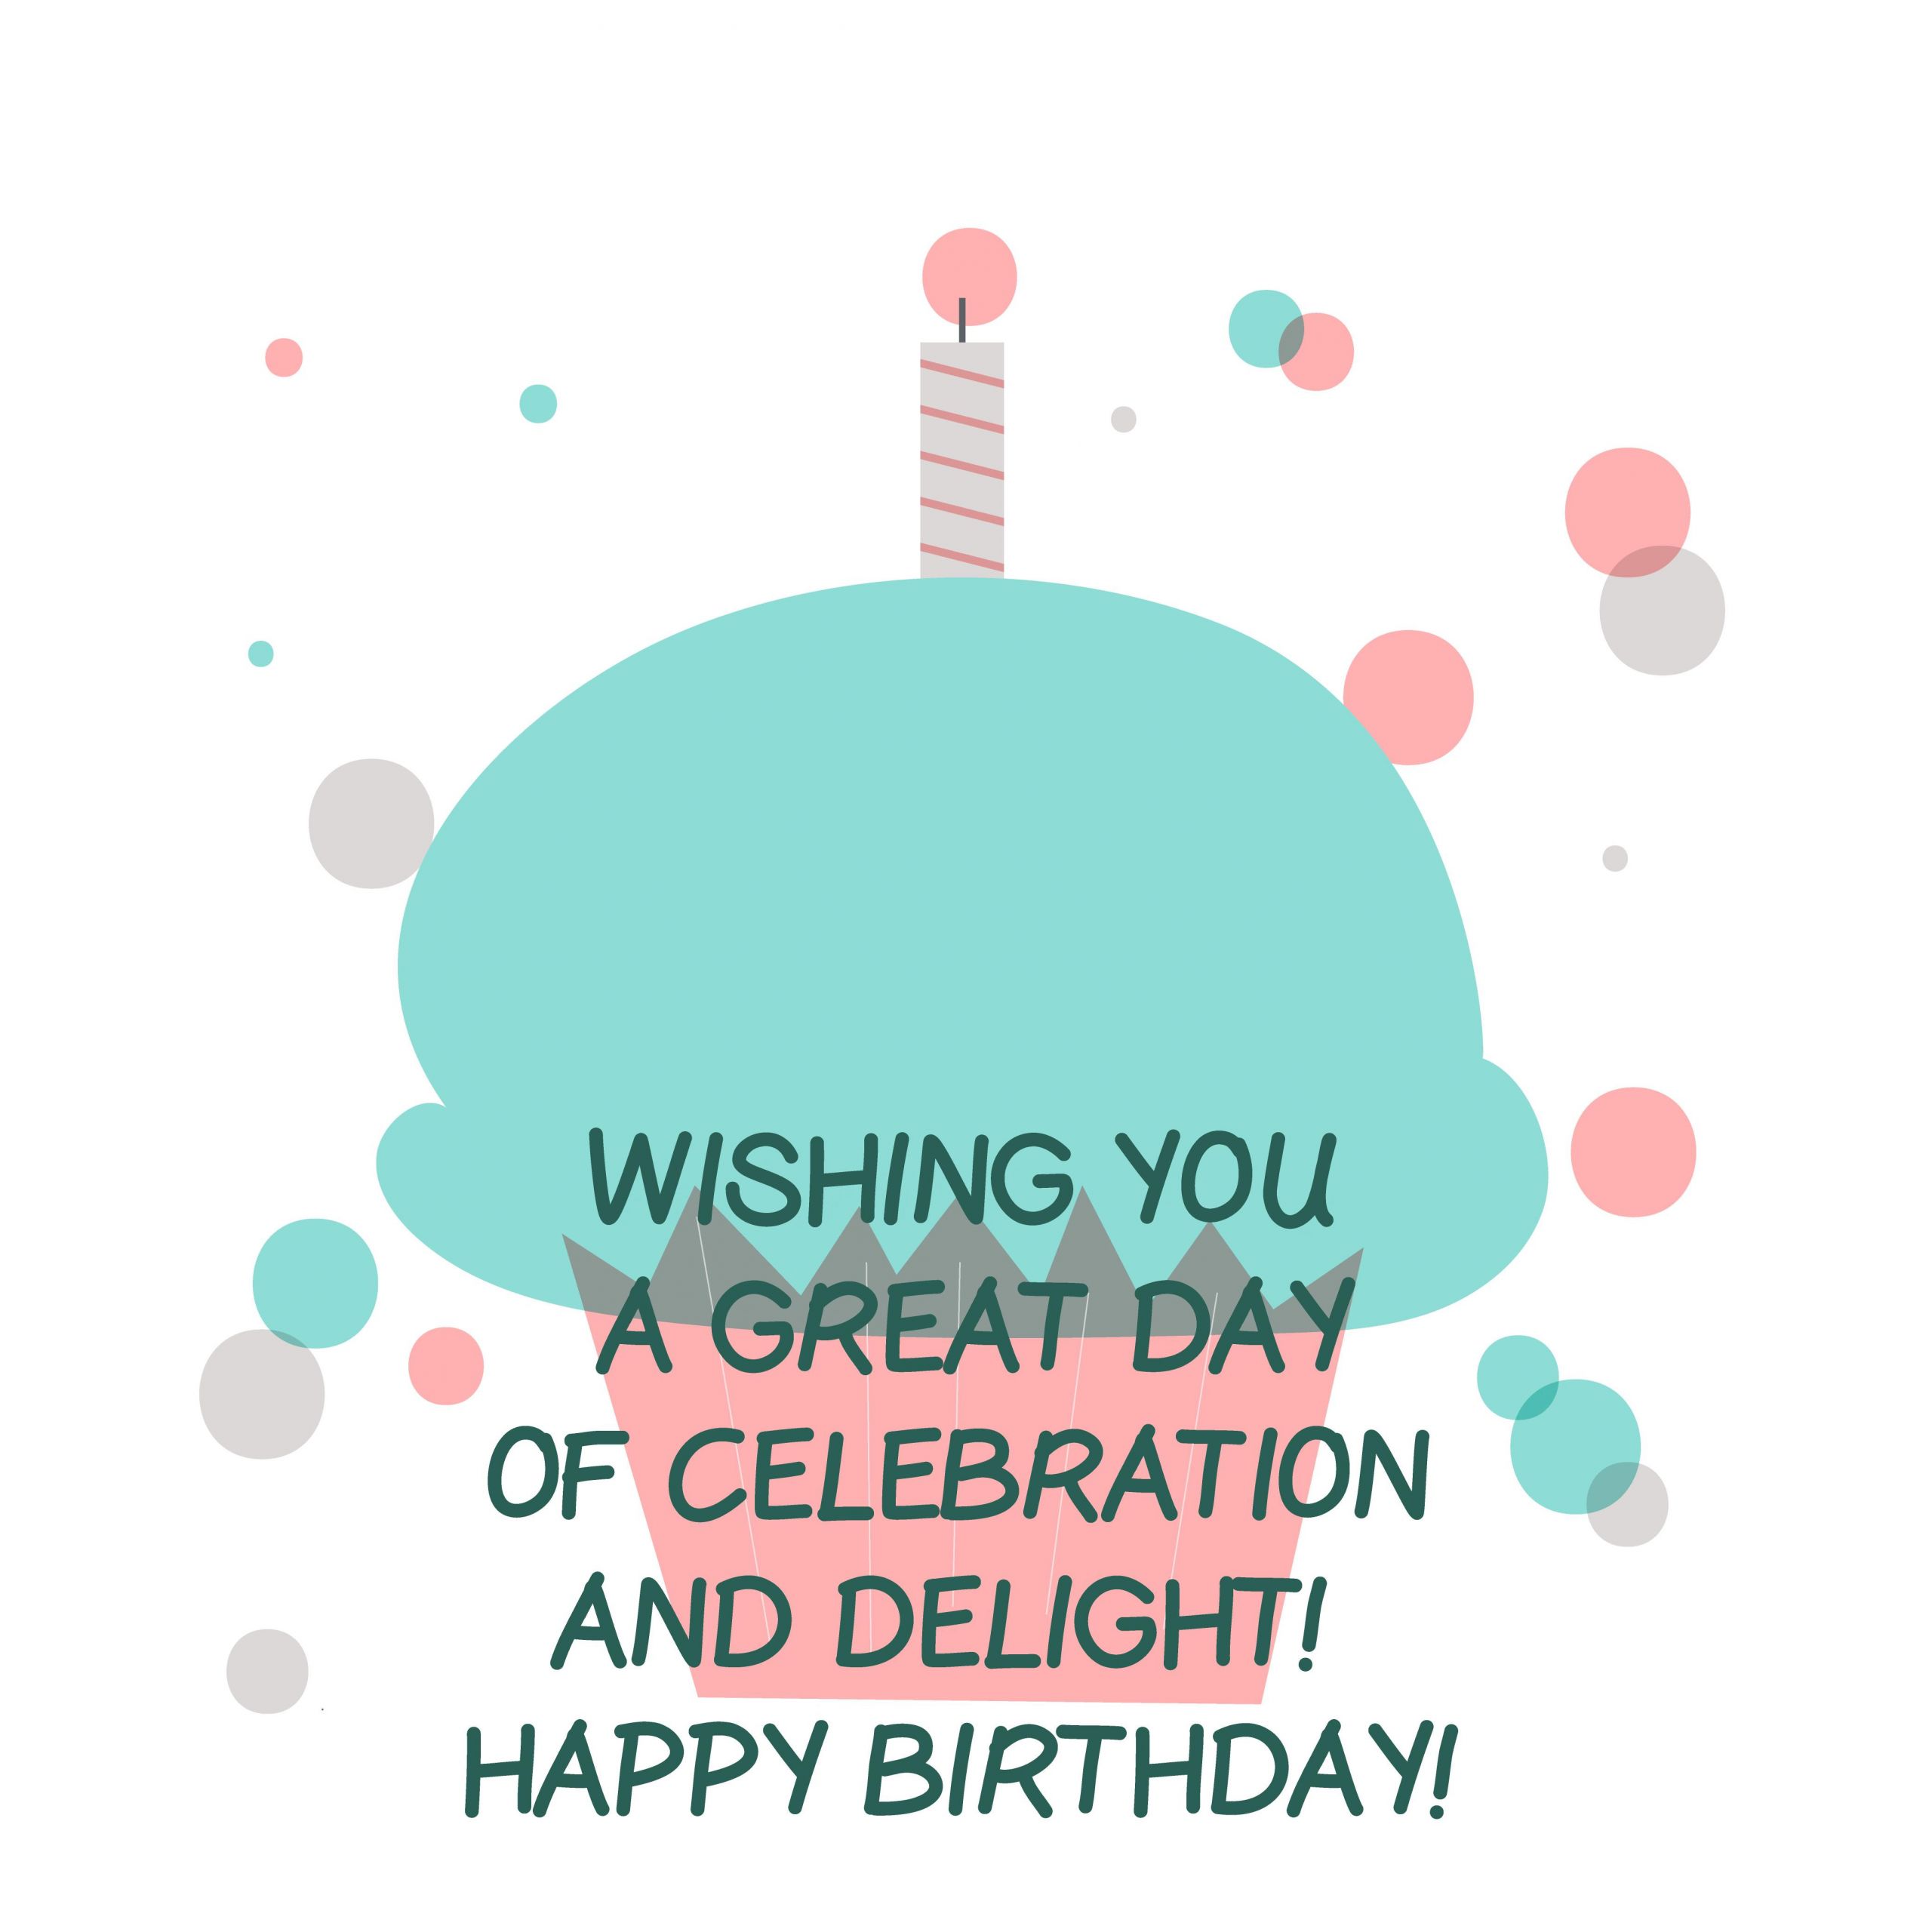 Sweetest Birthday Quotes
 Top 240 Sweet Birthday Messages and Wishes Top Happy